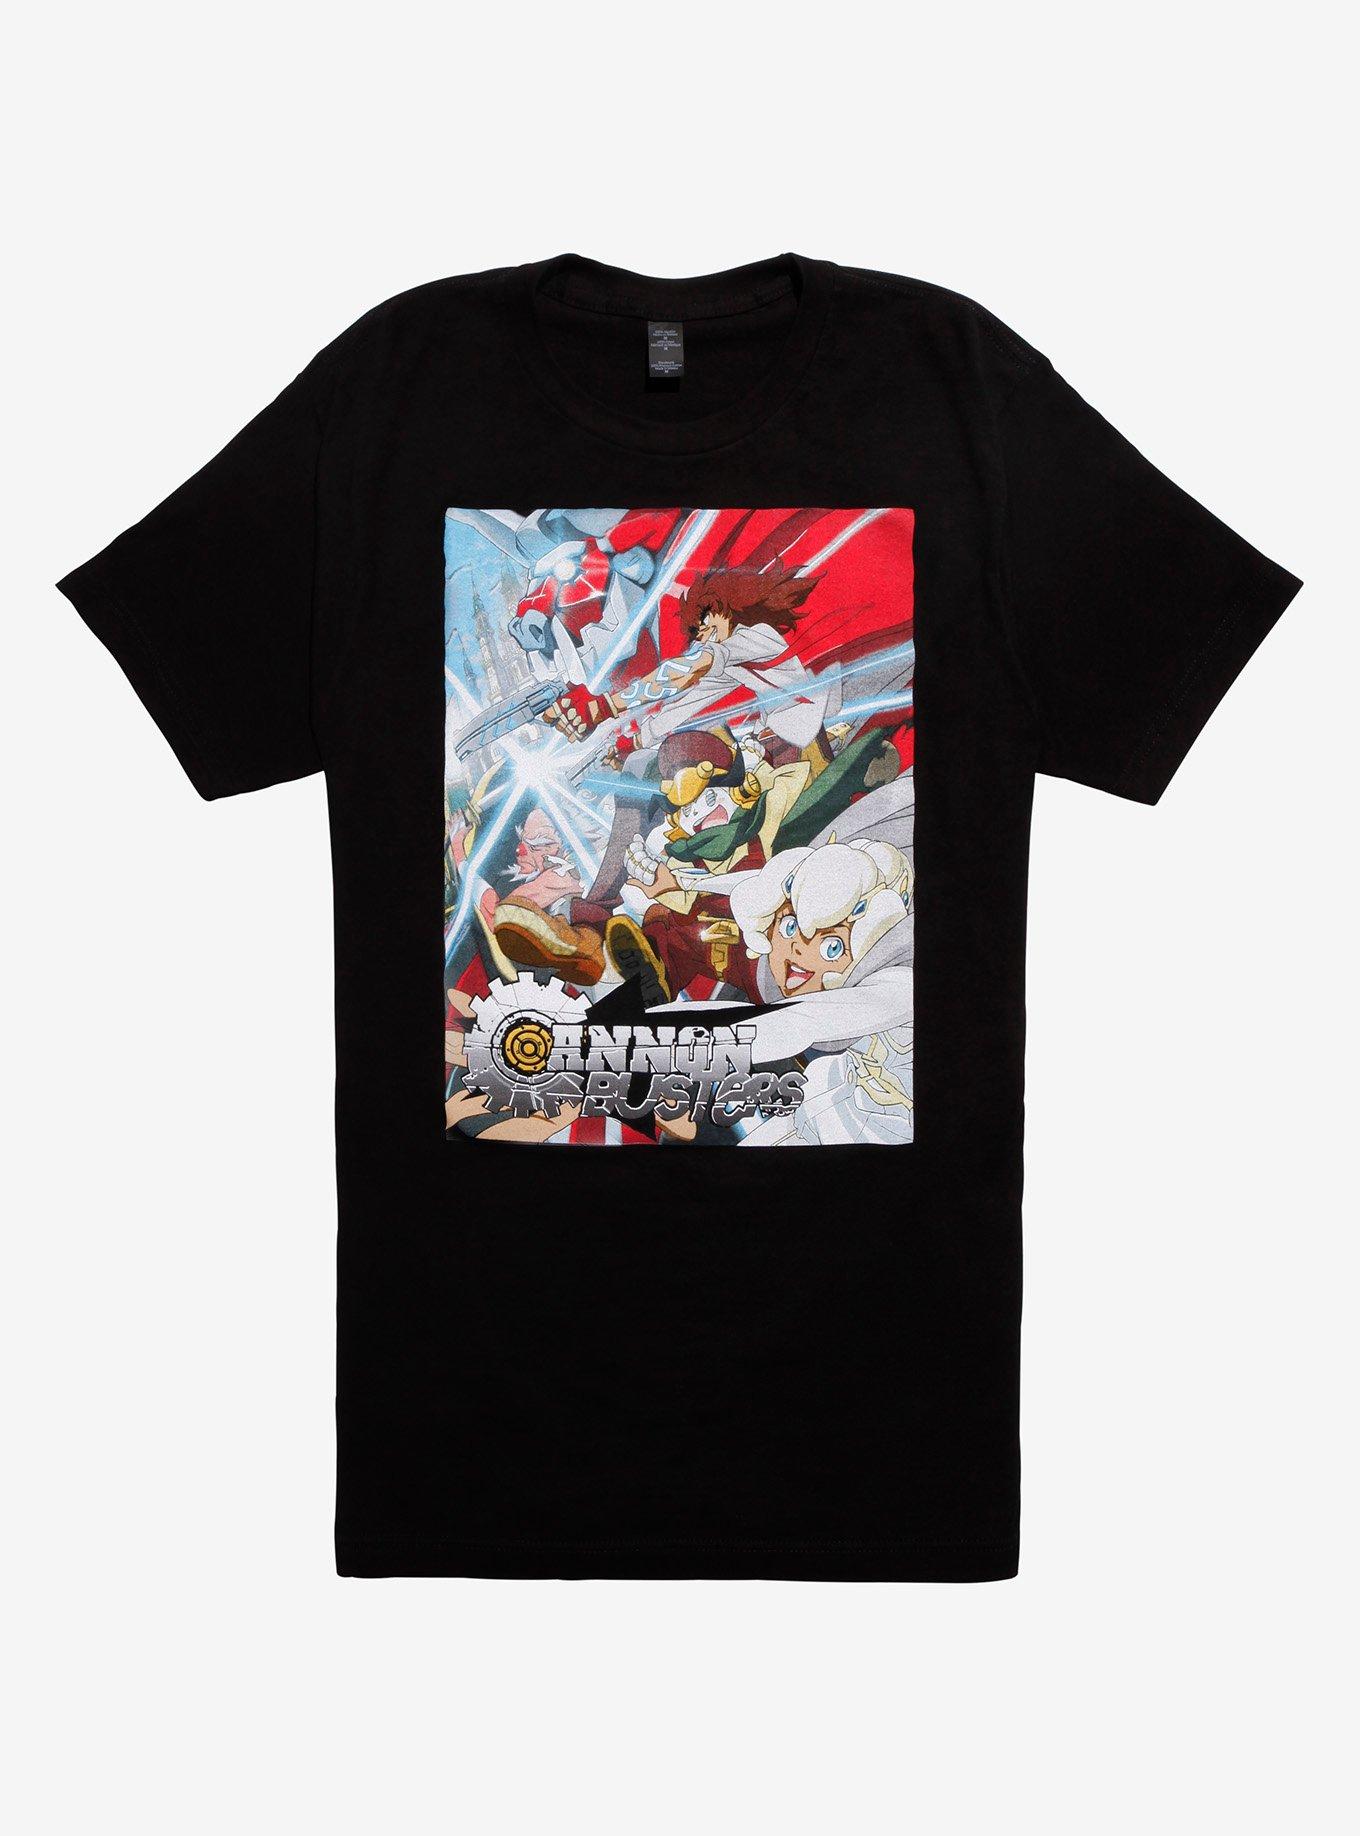 Cannon Busters Poster Art T-Shirt | Hot Topic